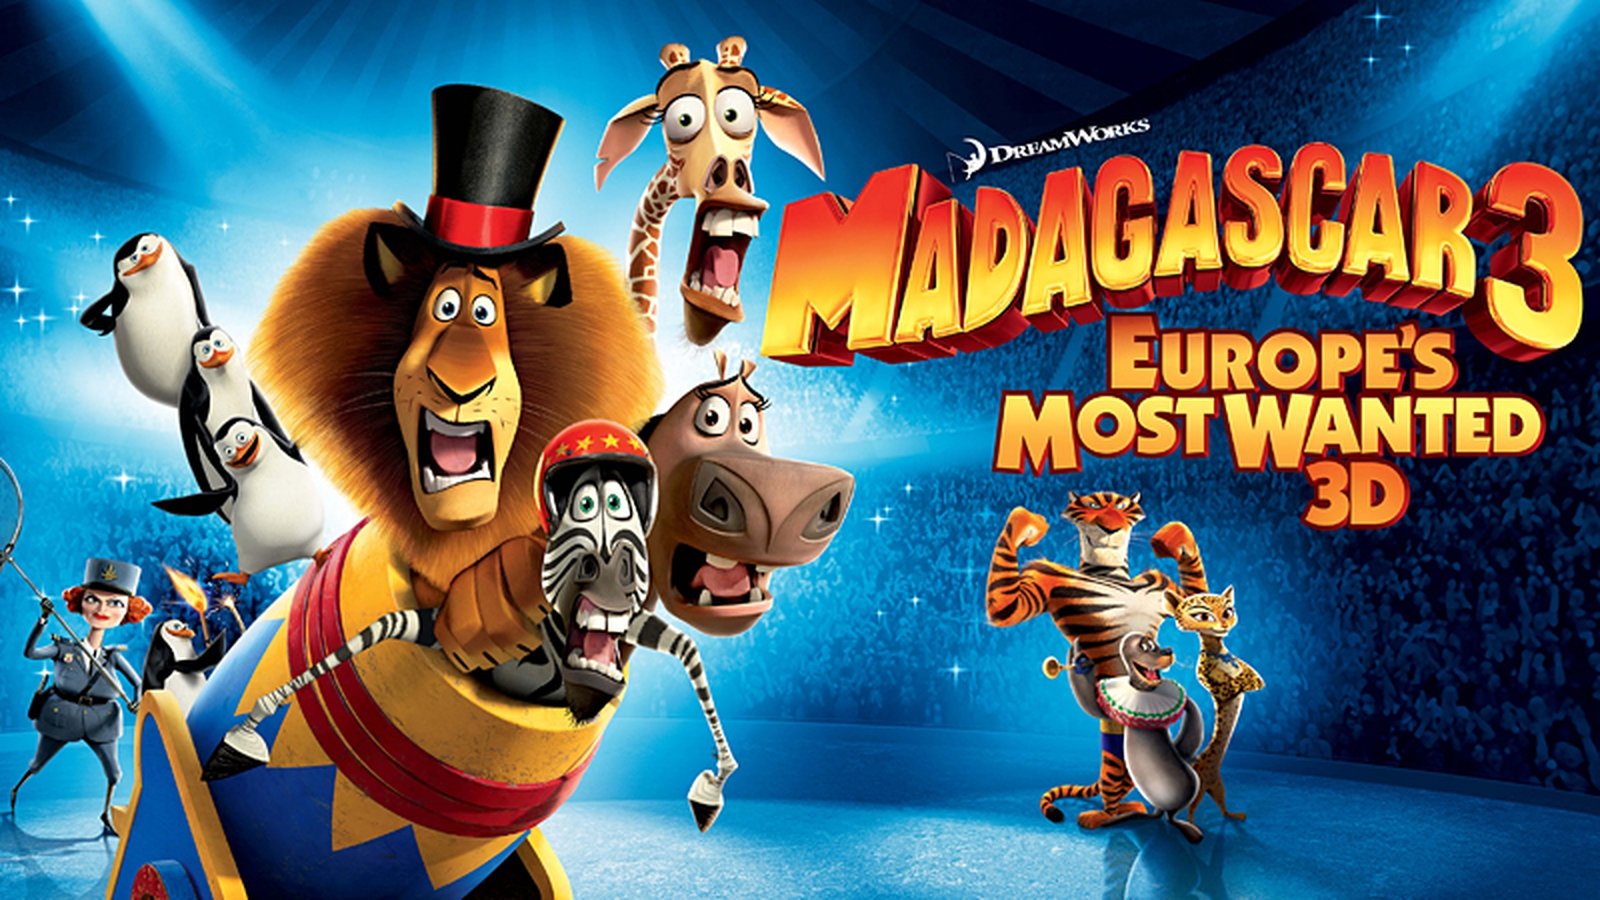 Madagascar 3 Europe's most wanted. Мадагаскар 3 Madagascar 3 Europe's most wanted 2012. Мадагаскар 3 (2012) poster. Дримворкс Мадагаскар 3.